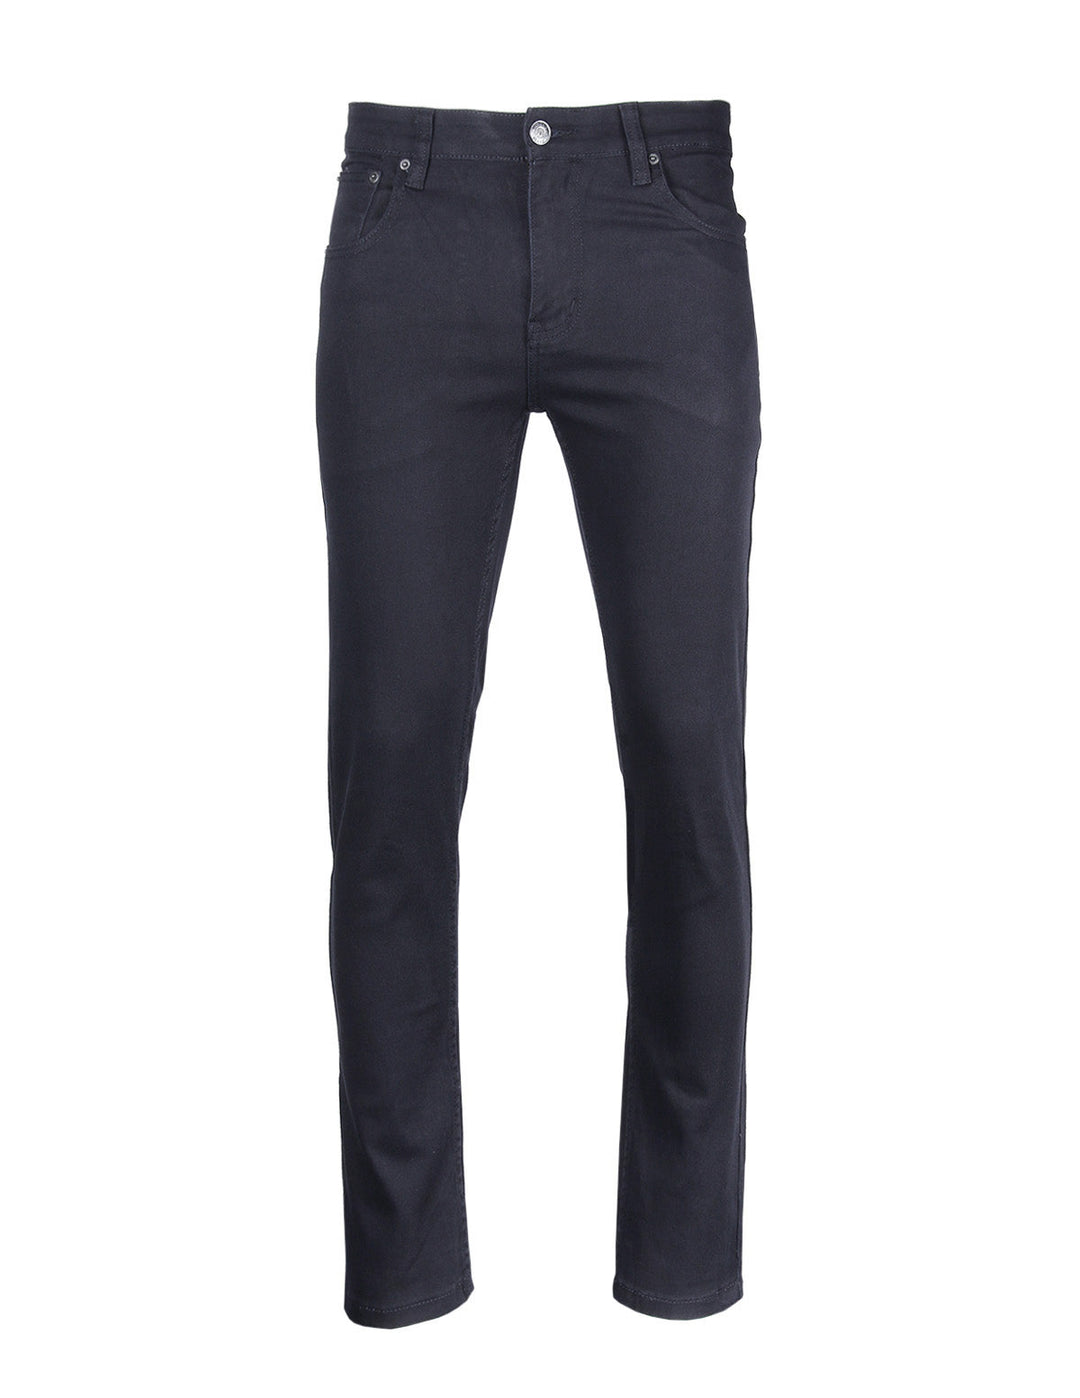 Victorious by ZIMEGO Mens Skinny Fit Stretch Twill Pants Navy